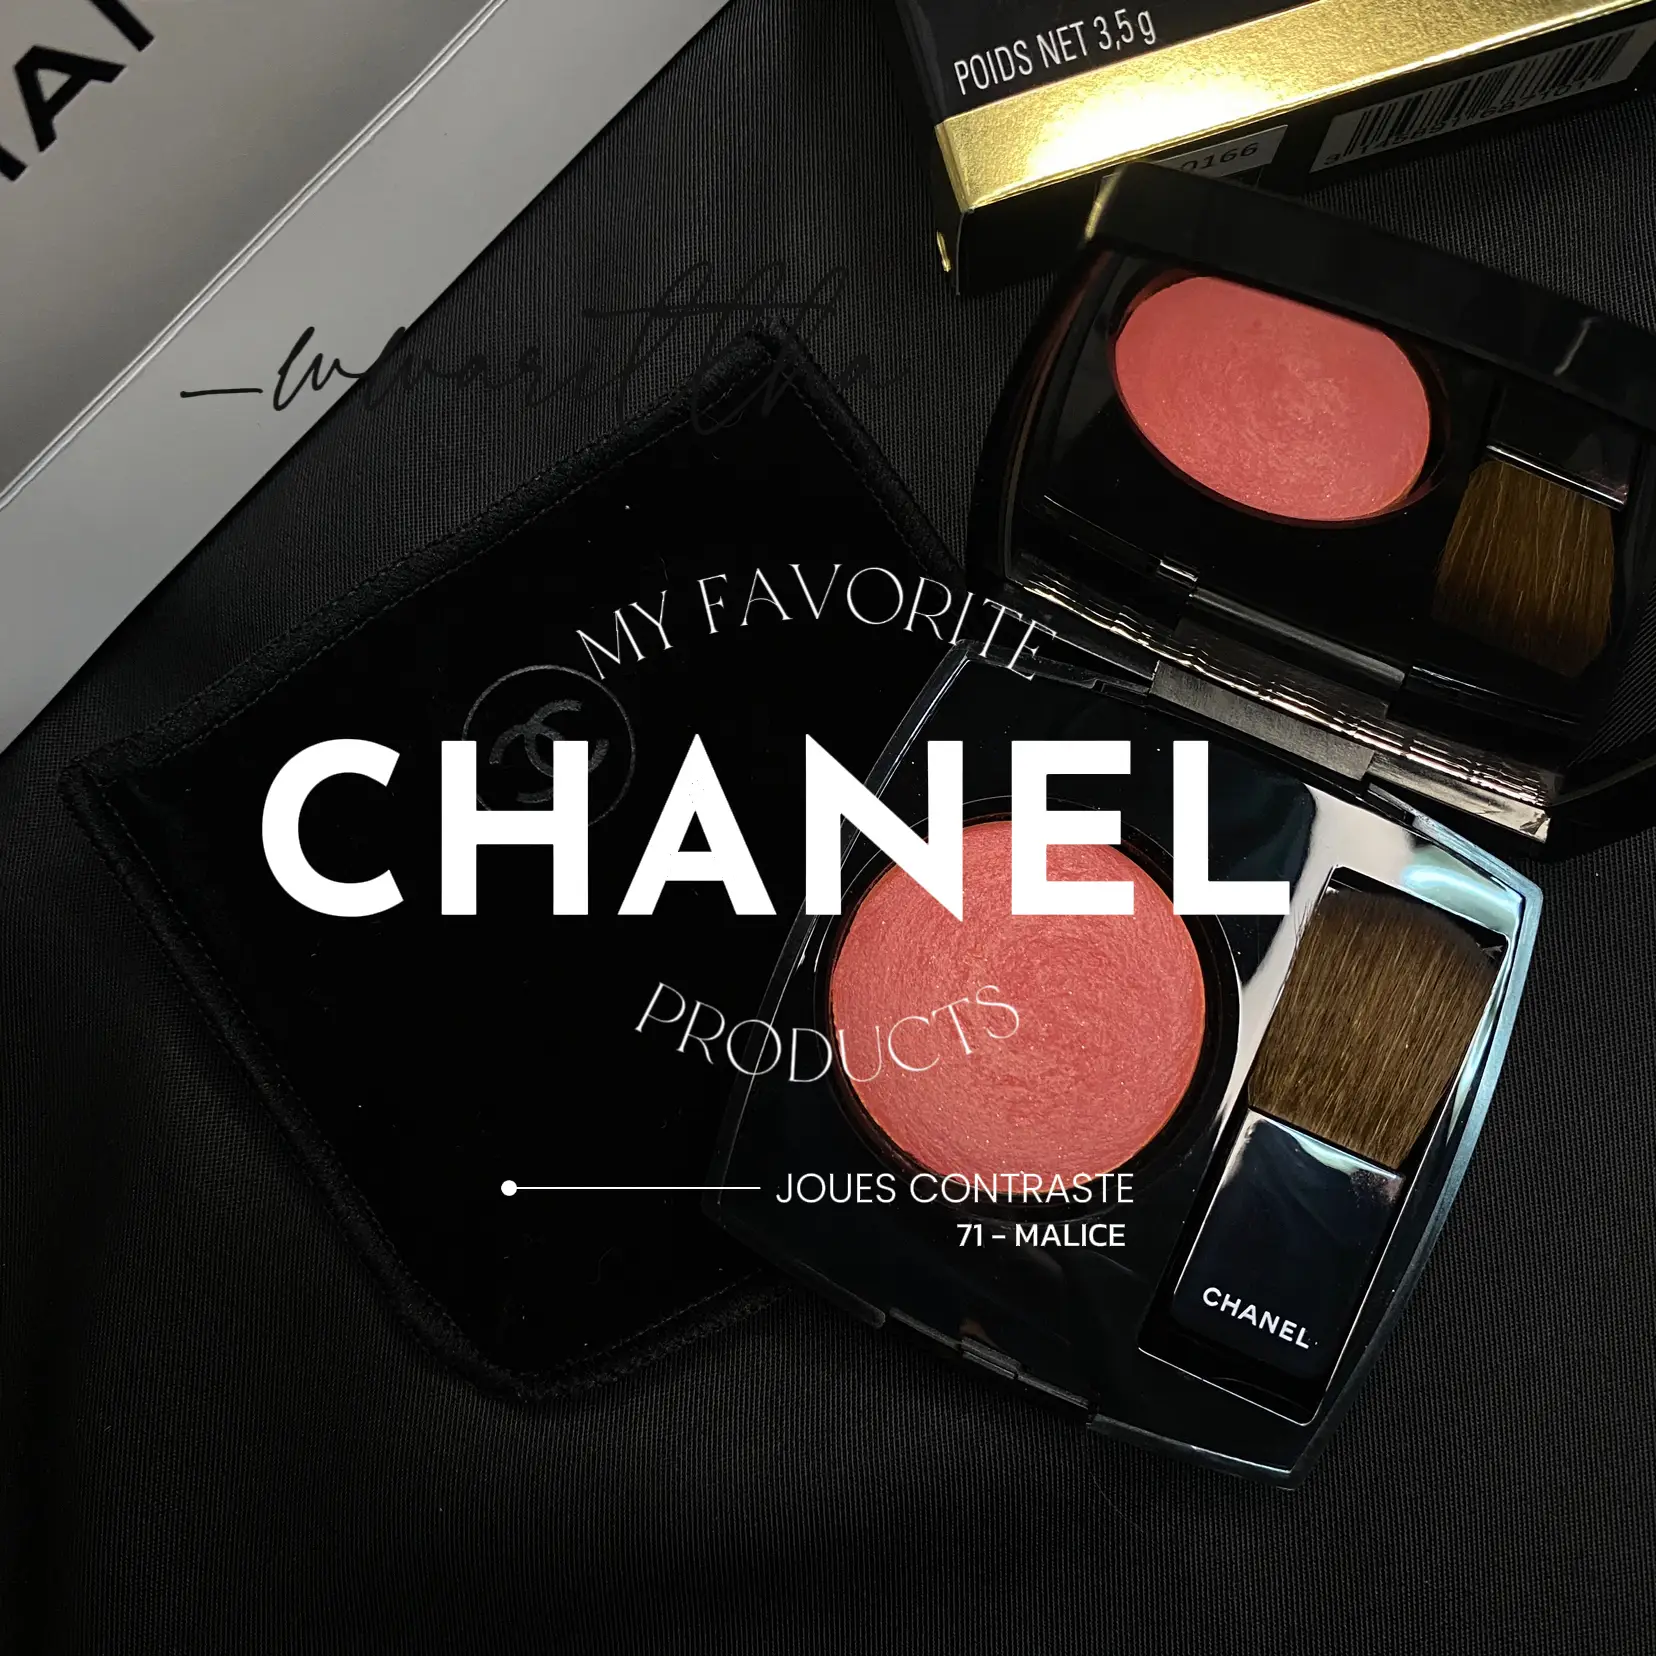 BLUSH REVIEW CHANEL JOUES CONTRASTE • 71 - MALICE